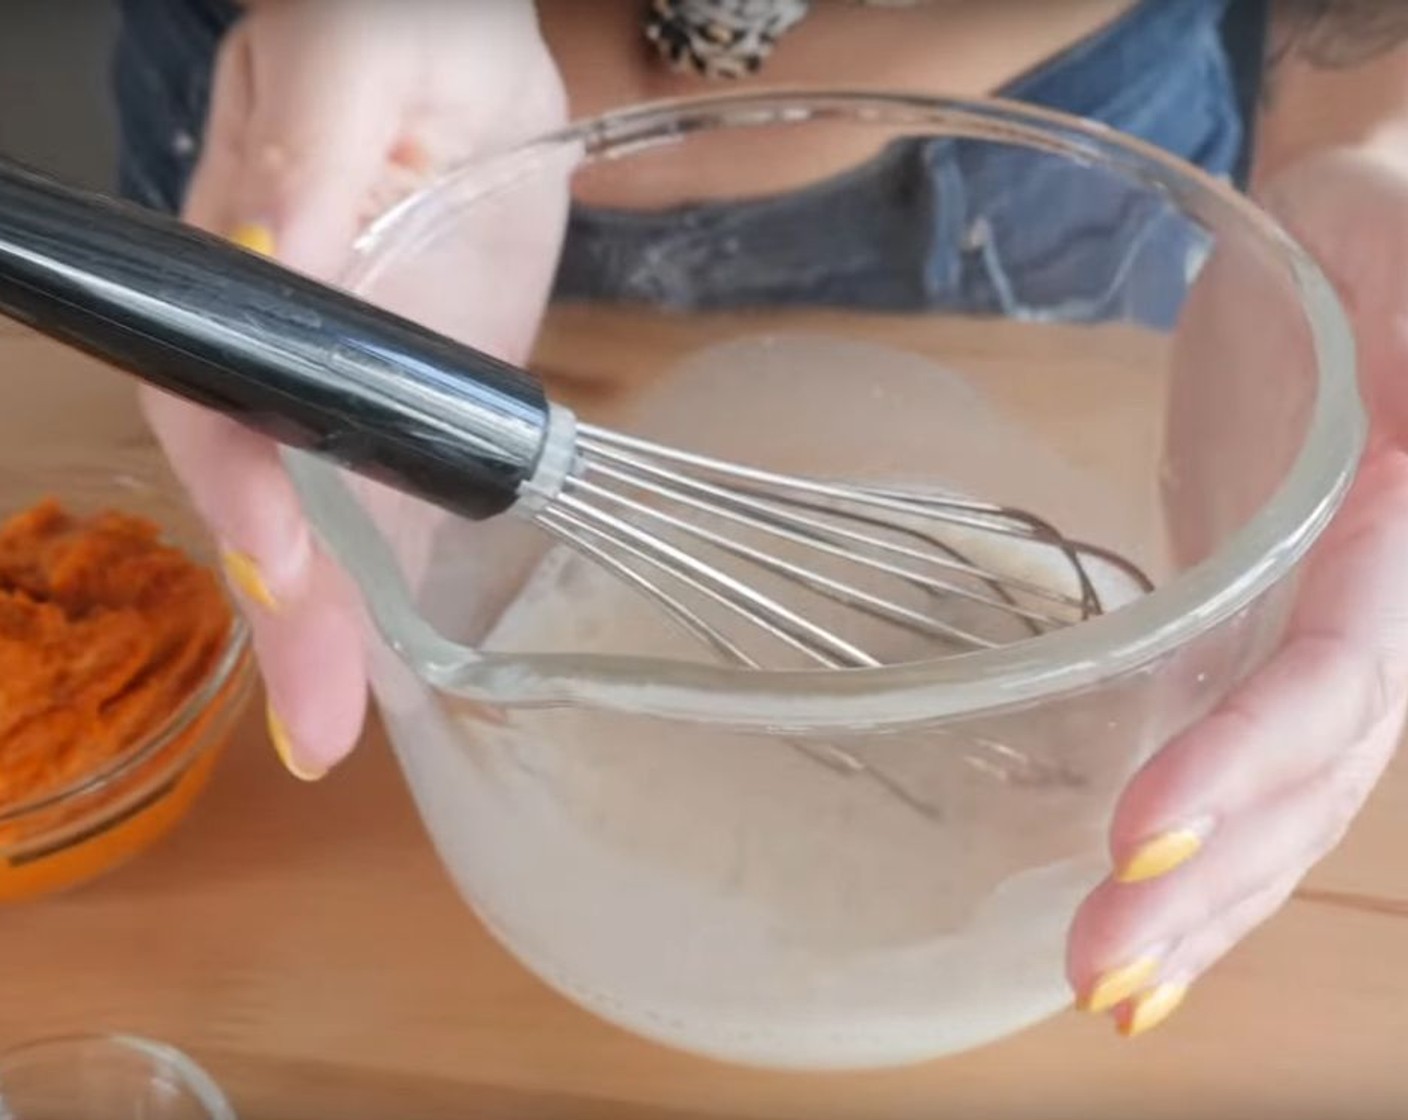 step 2 In a separate bowl, combine Non-Dairy Milk (1 cup) and Apple Cider Vinegar (1 Tbsp) and whisk well. Set aside for 10 minutes.